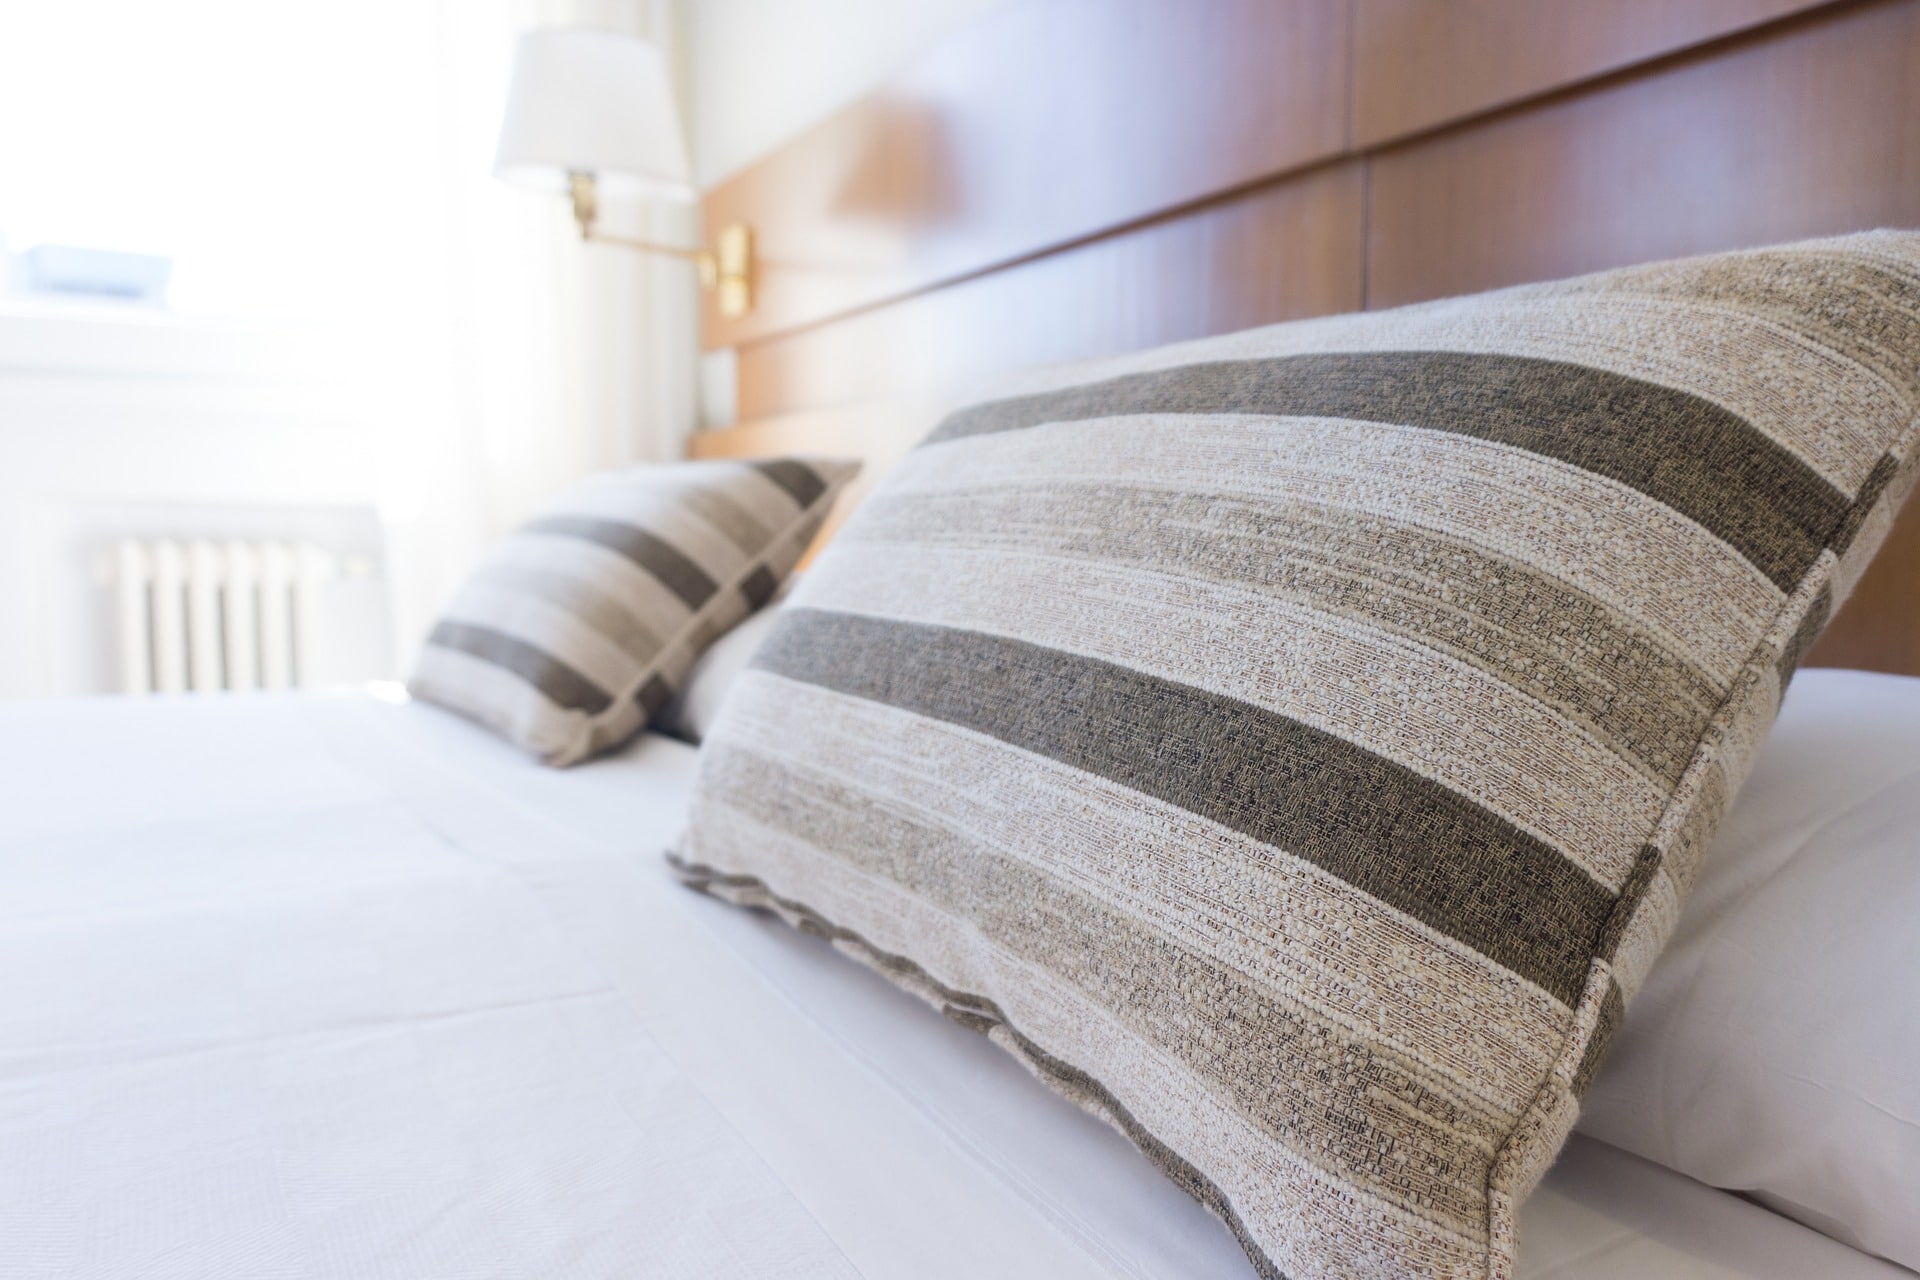 How to Keep Bed Bugs Out of Your House